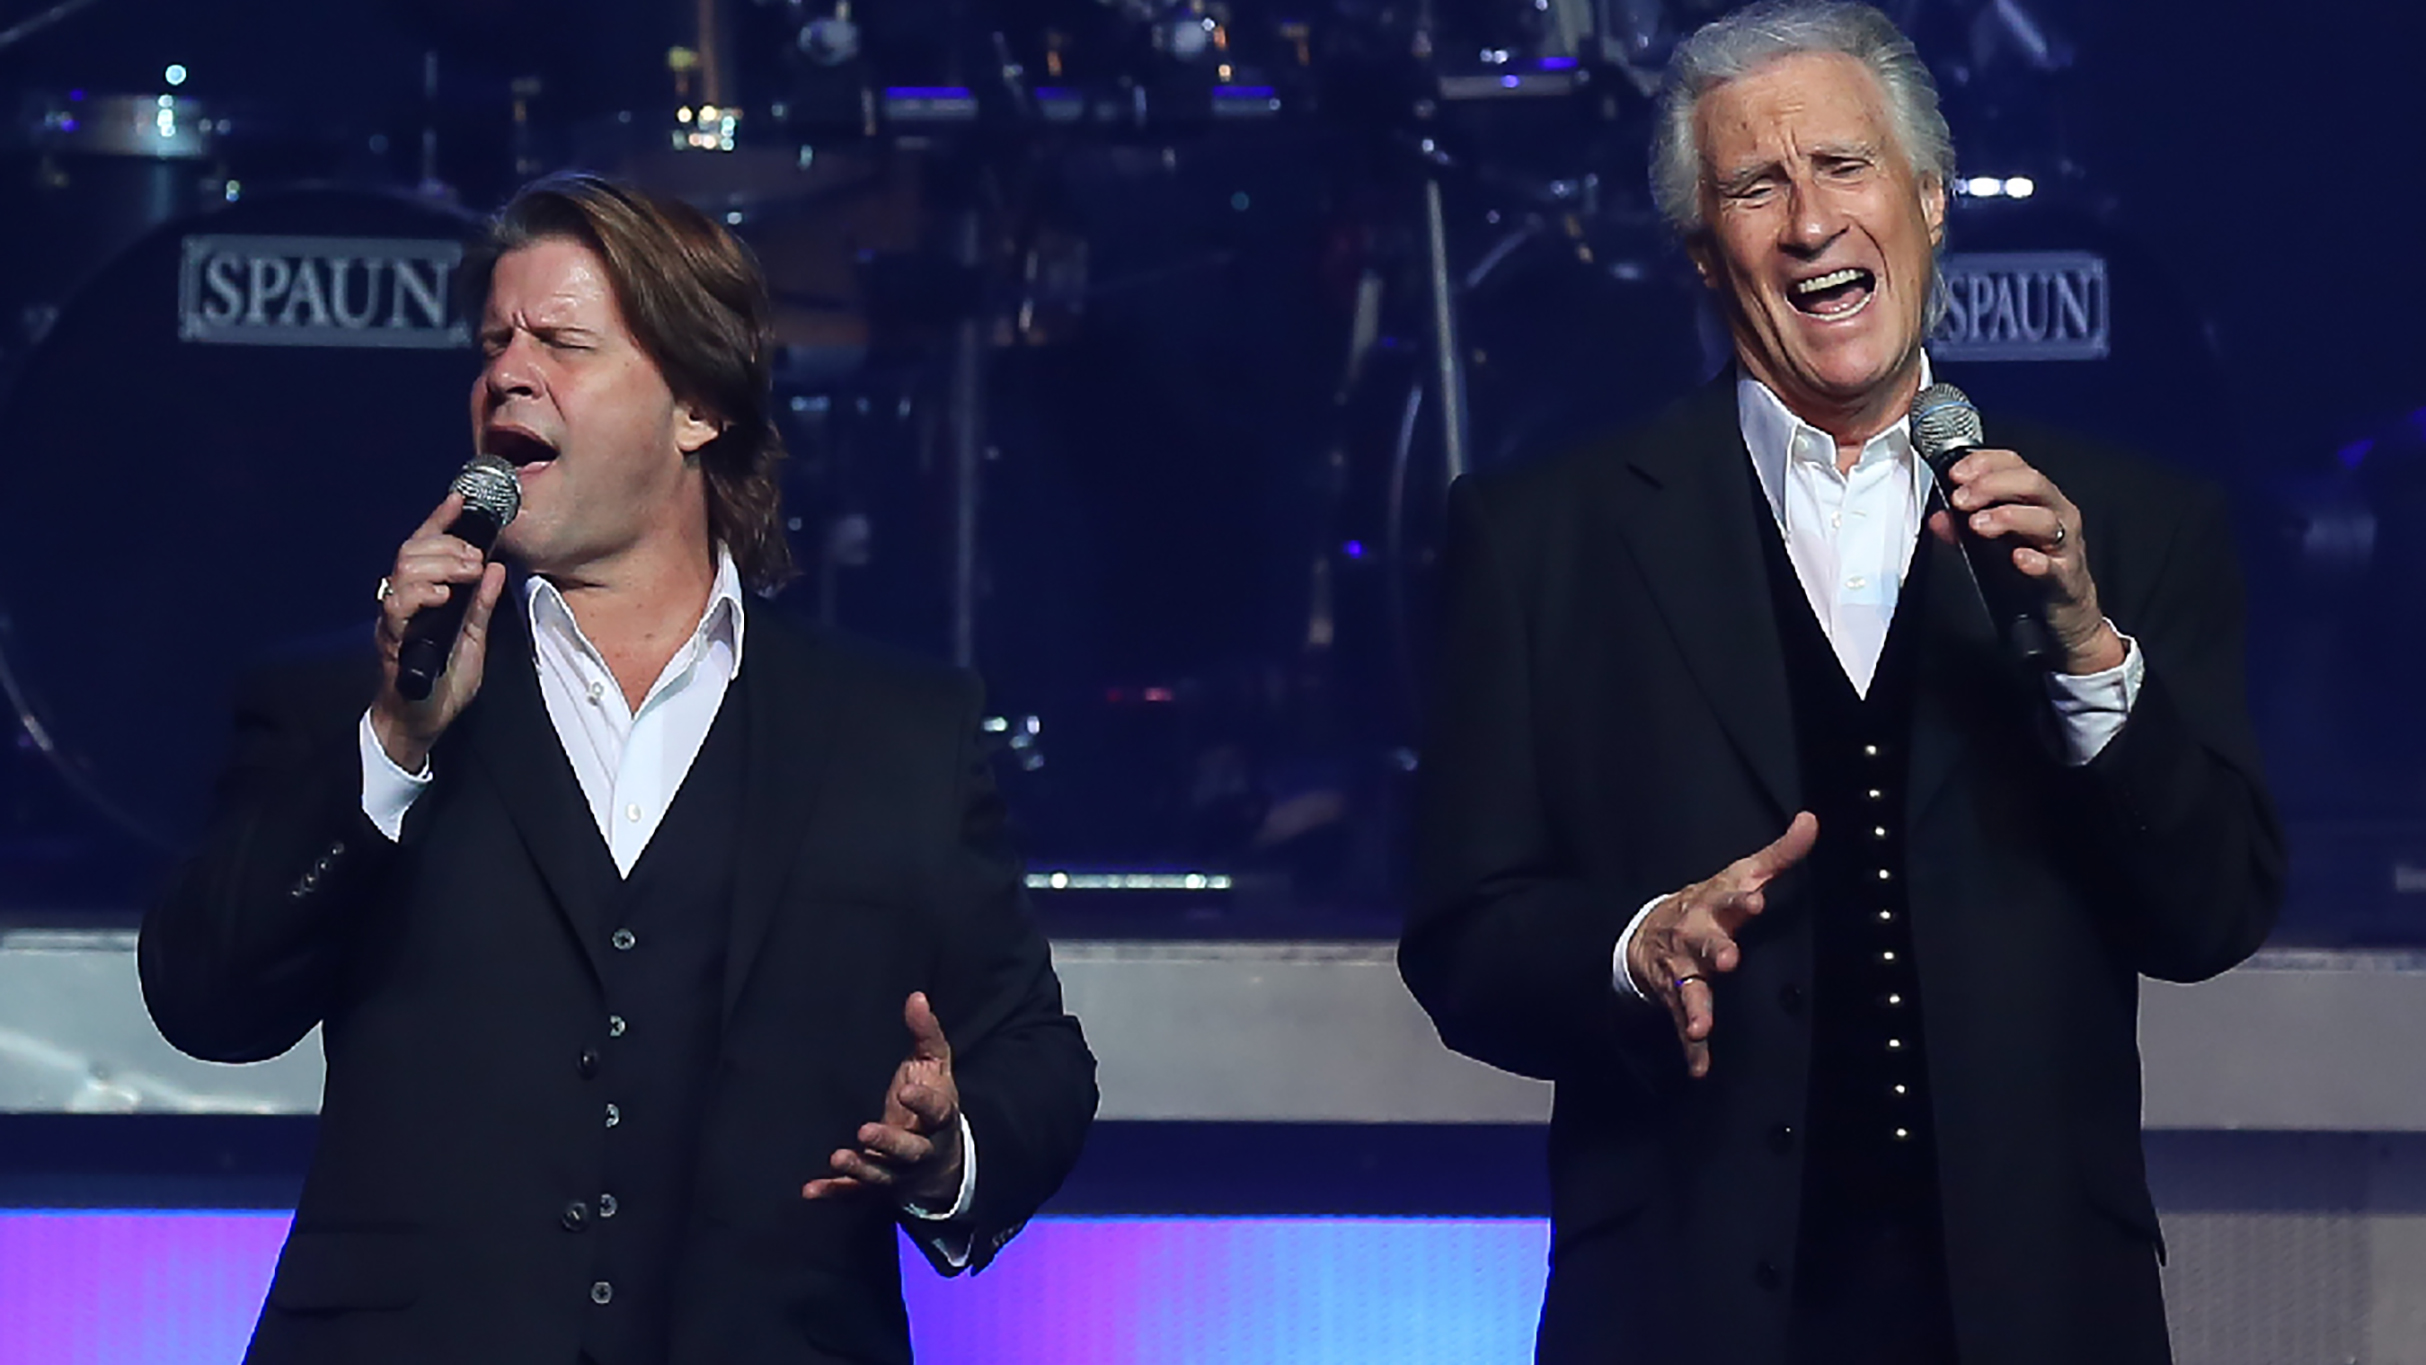 The Righteous Brothers: Bill Medley & Bucky Heard